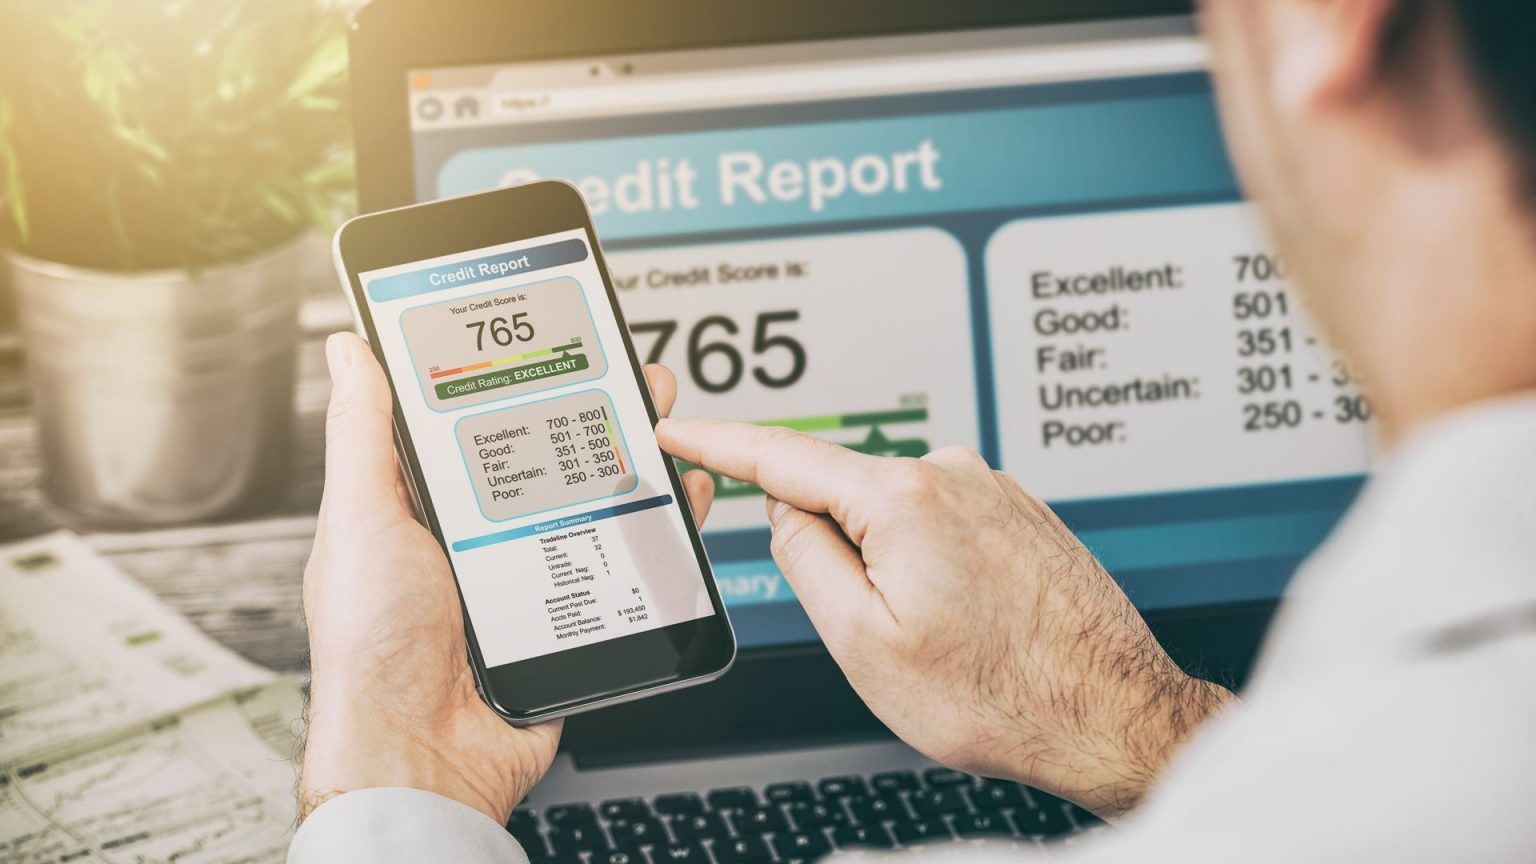 Check Credit Score: How I can check my credit score for free?